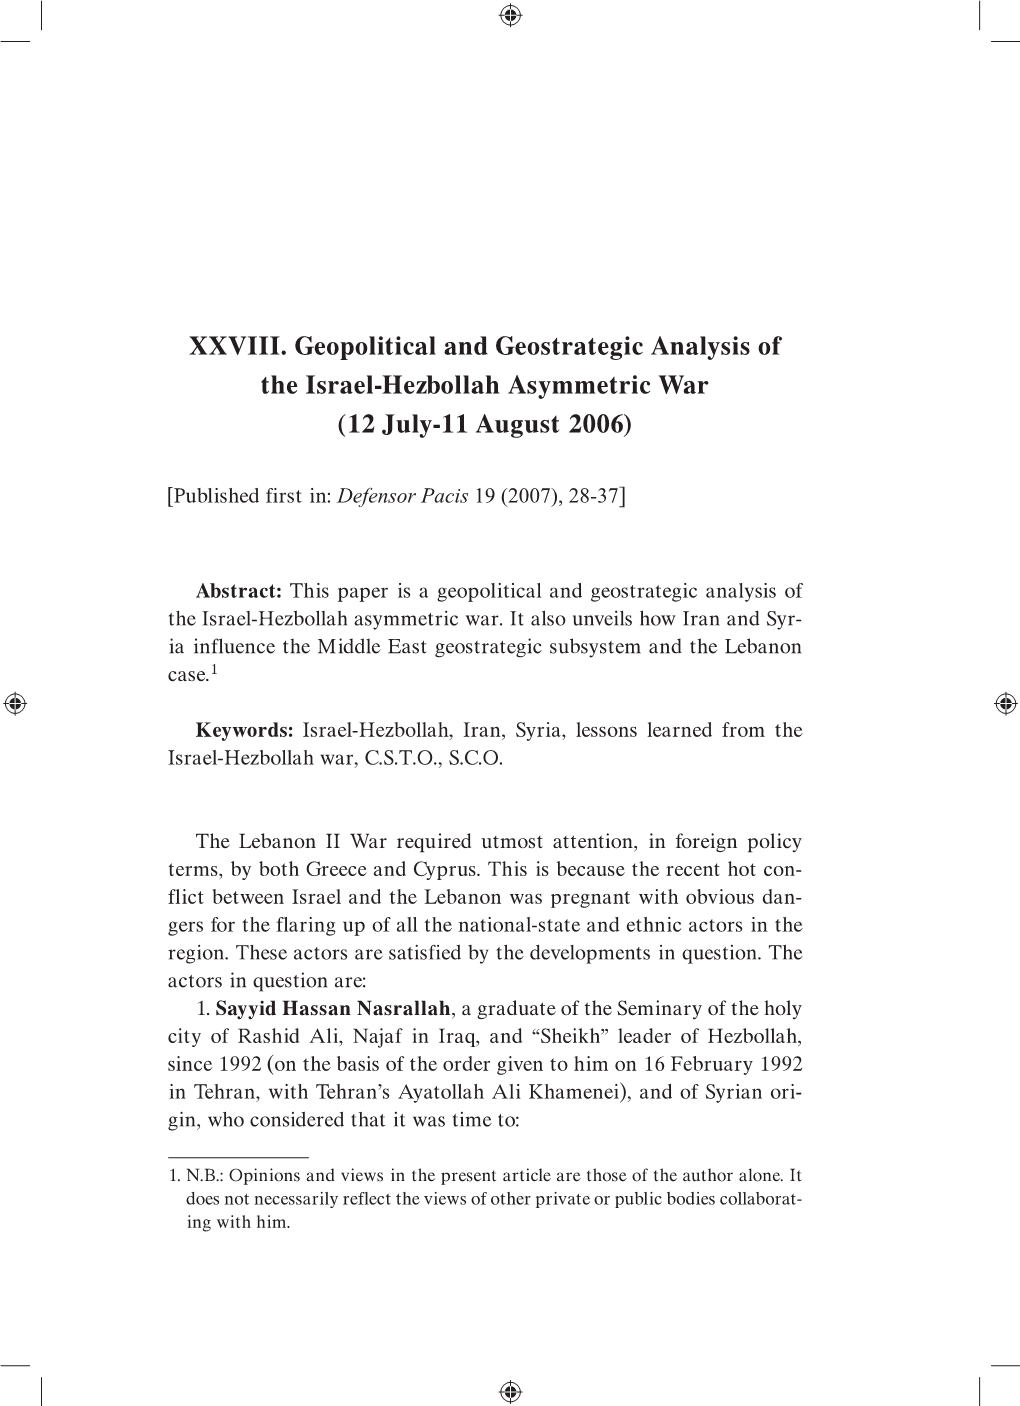 XXVIII. Geopolitical and Geostrategic Analysis of the Israel-Hezbollah Asymmetric War (12 July-11 August 2006)